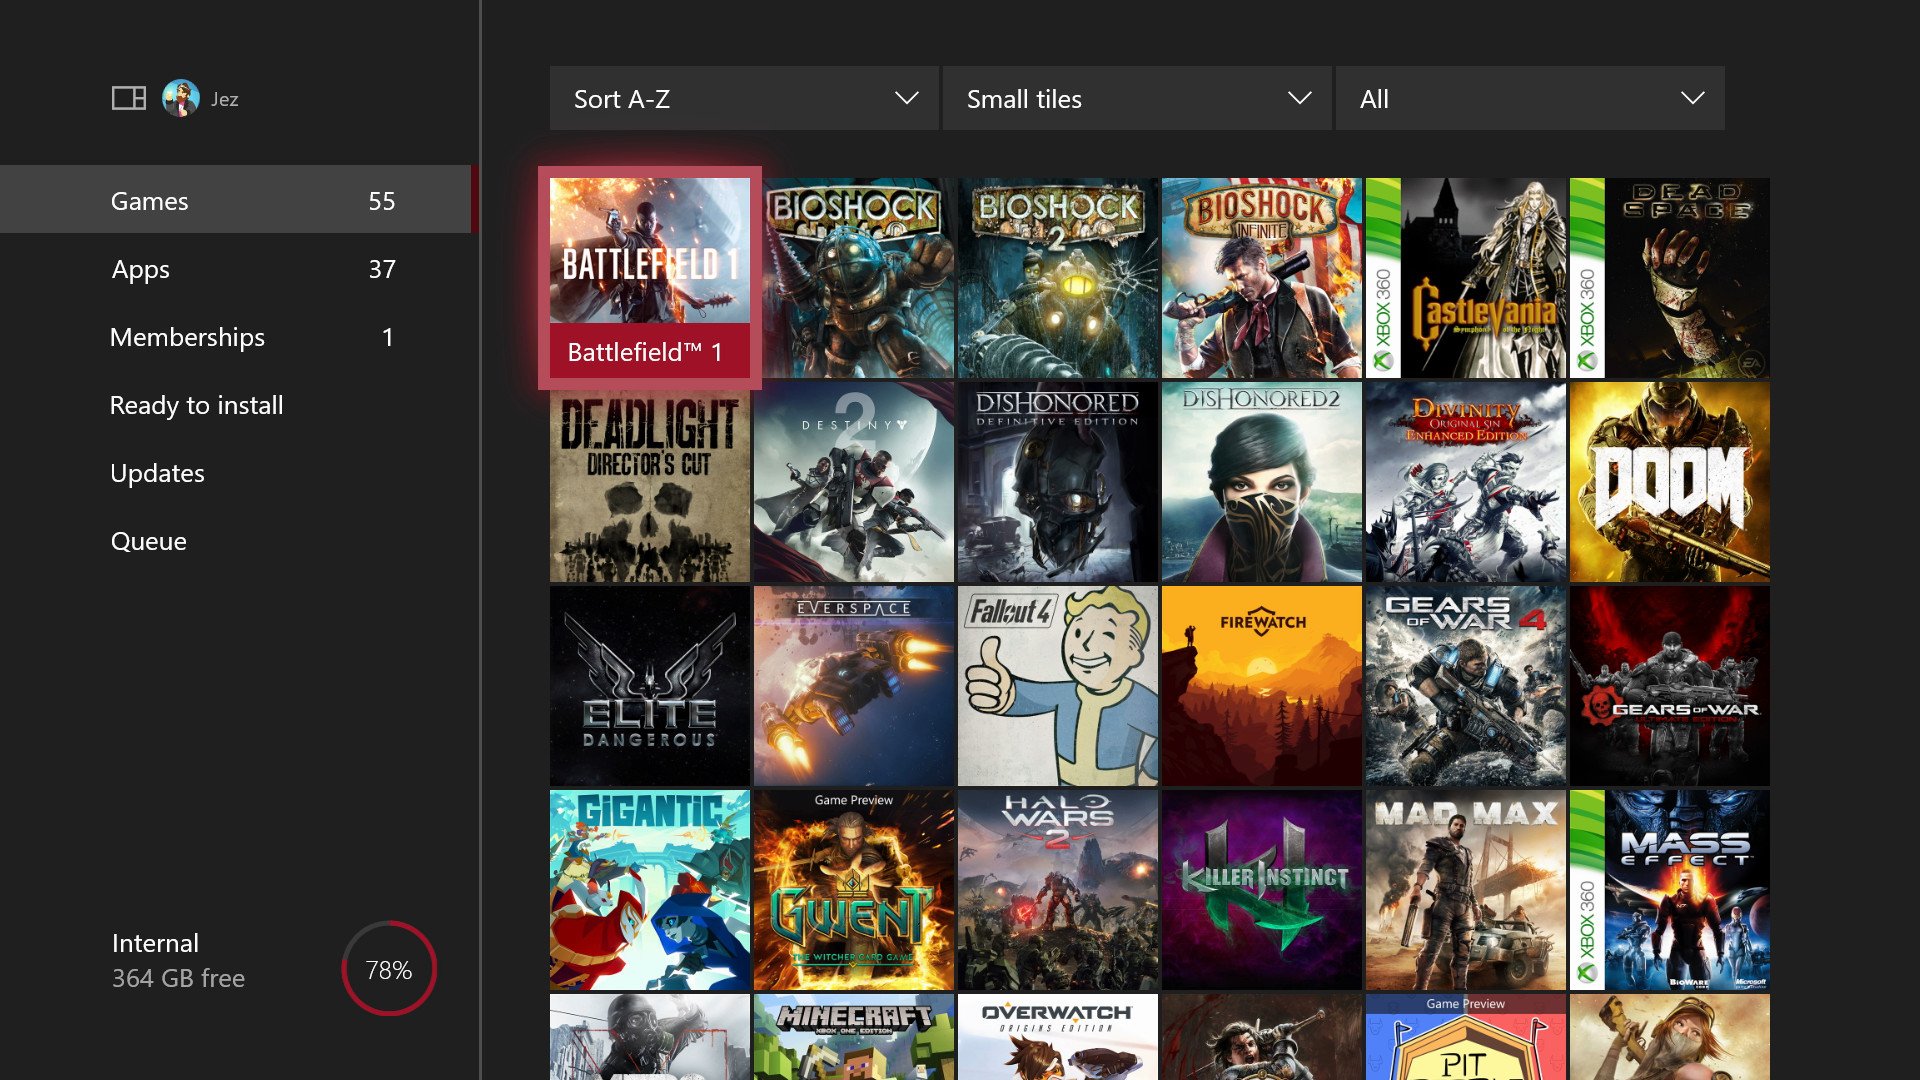 How to download games on Xbox.